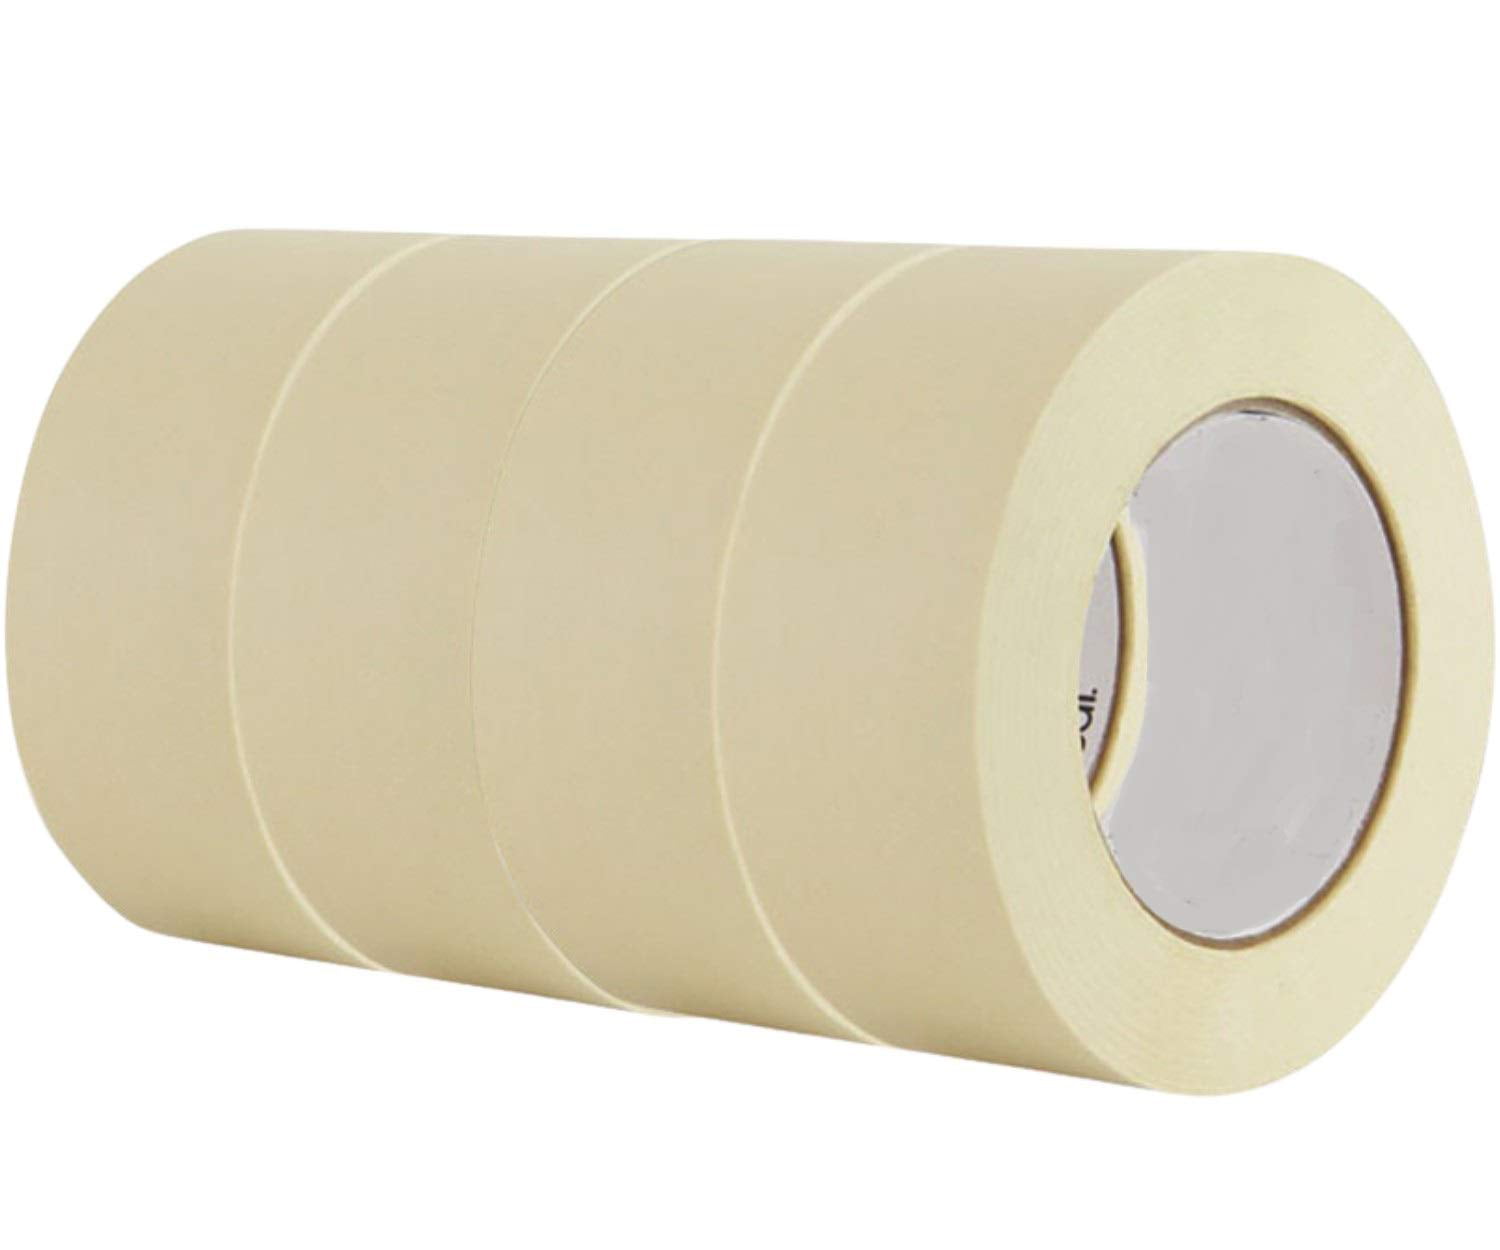 4 Rolls White Painters Tape Masking Tape 2 1 3/4 1/4 Inch Wide, Multi Size  Assor